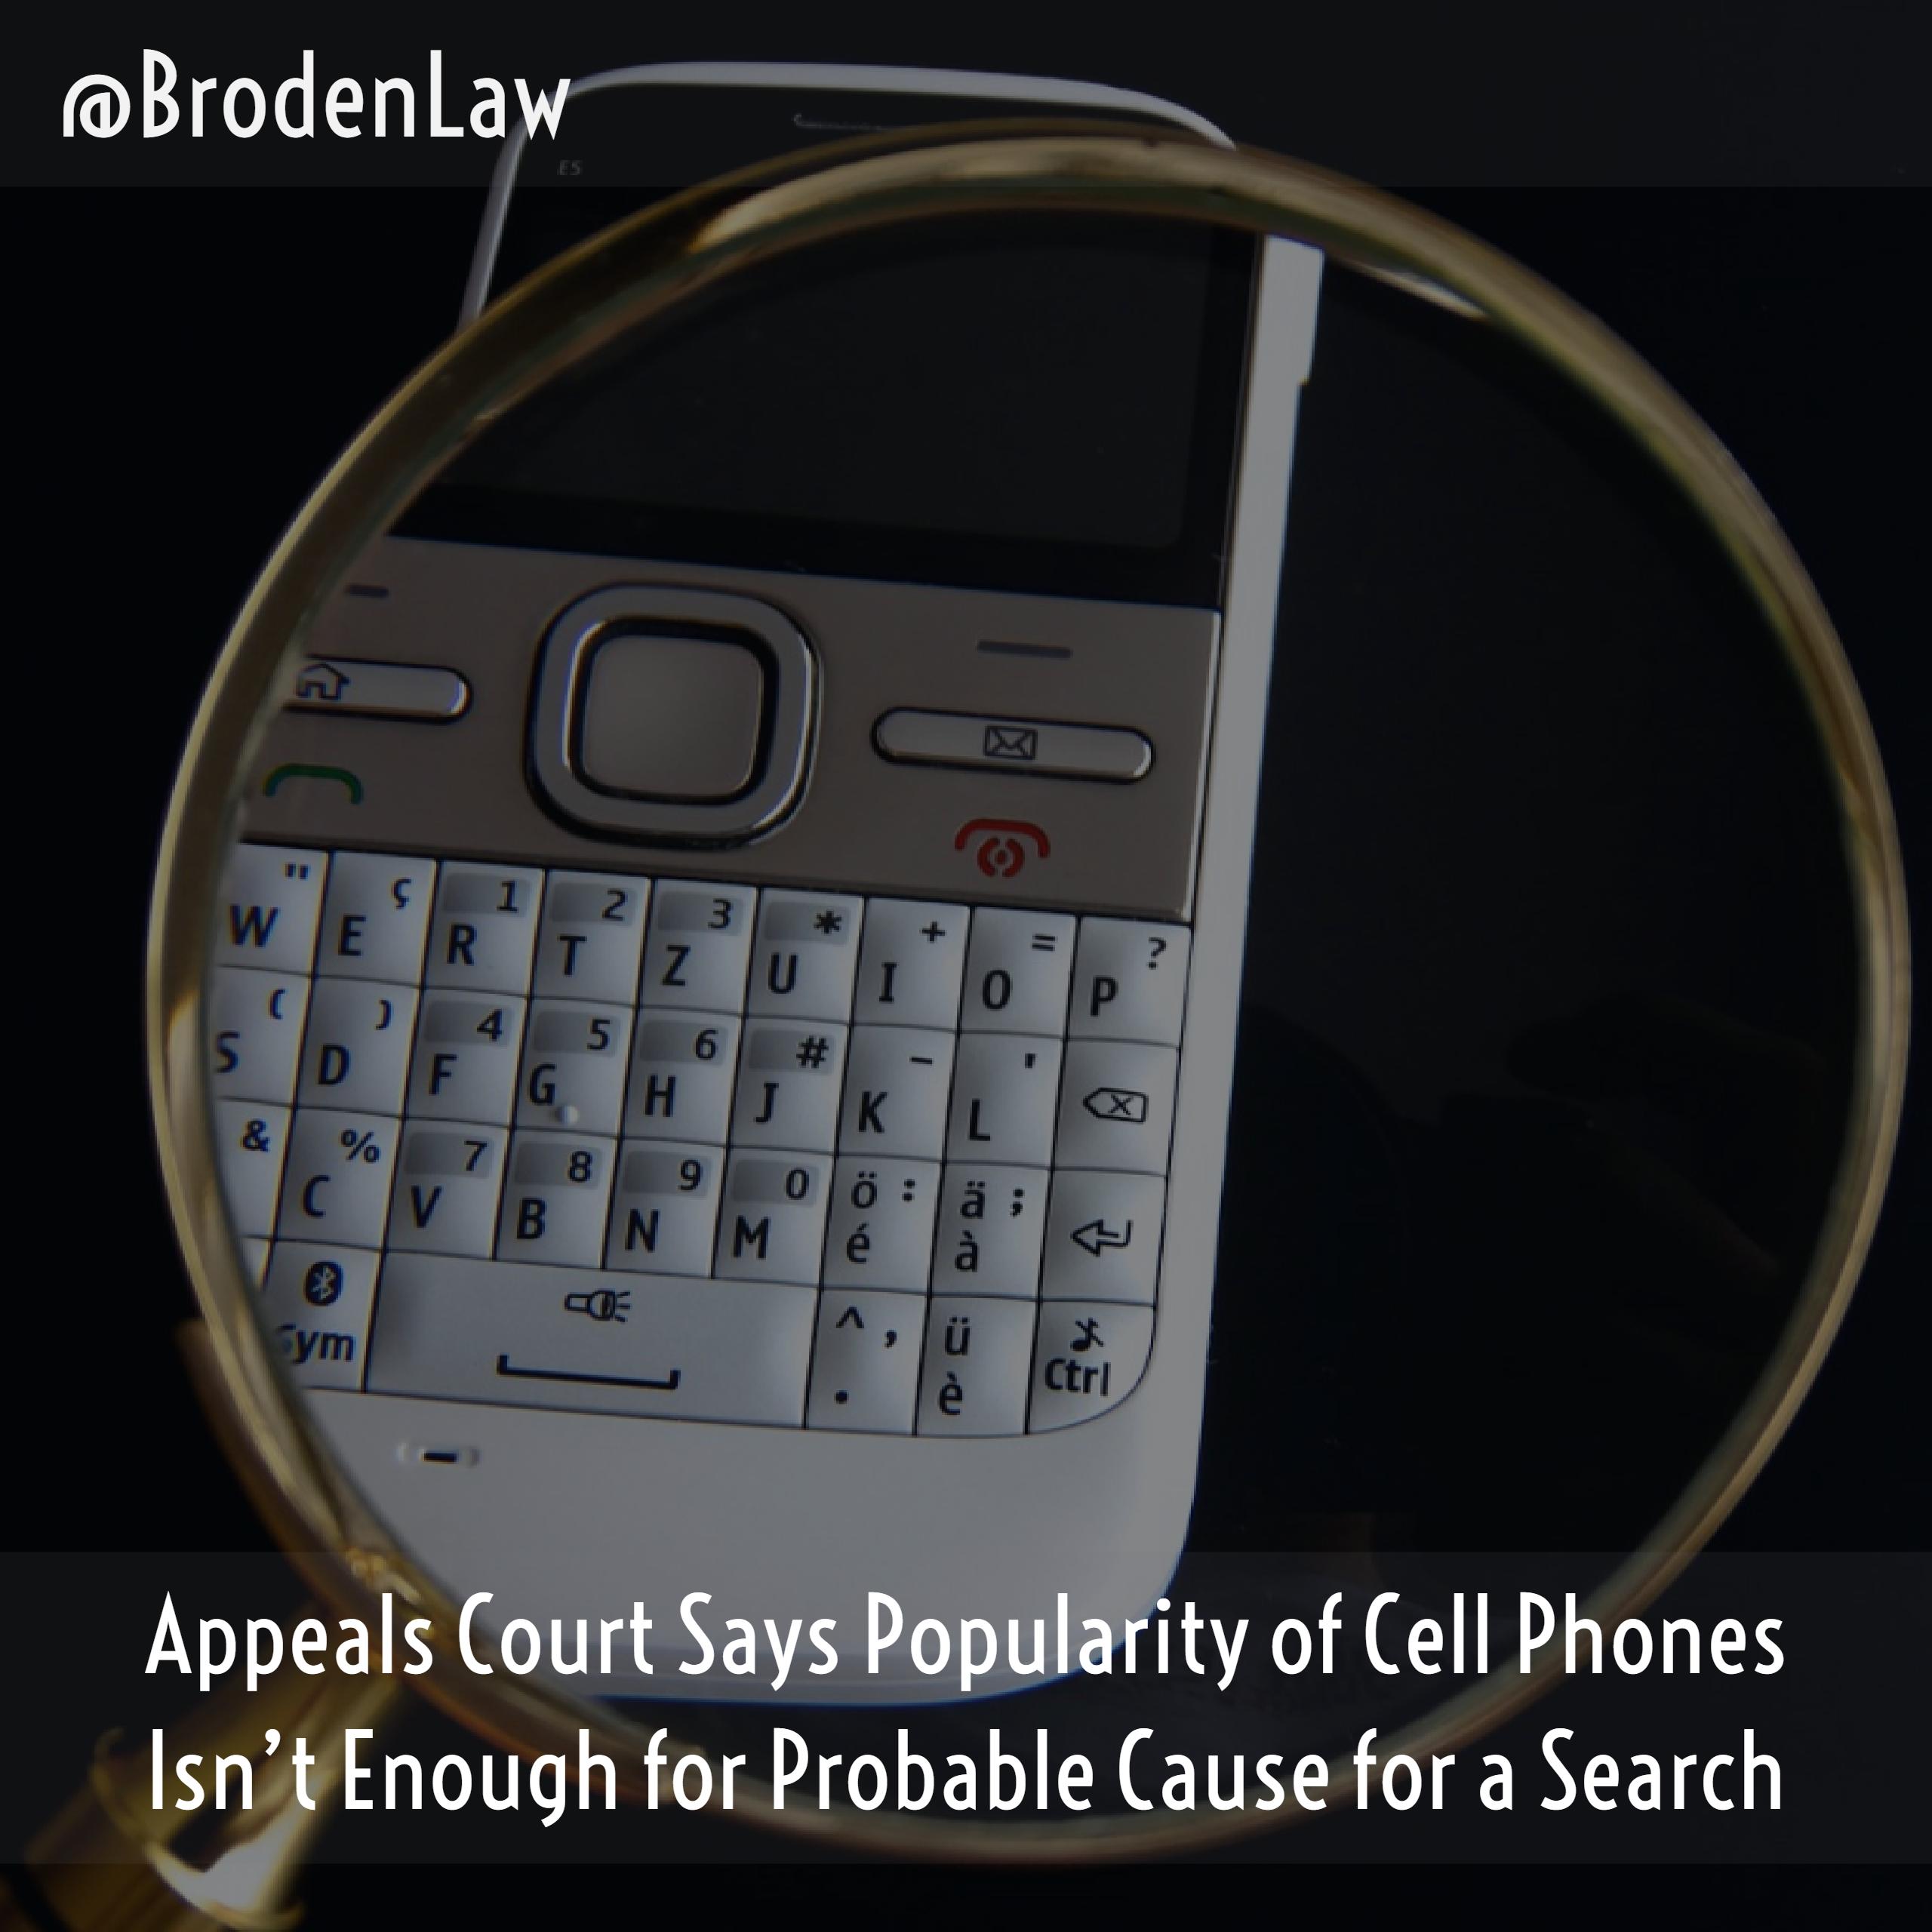 Appeals Court Says Popularity of Cell Phones Isn’t Enough for Probable Cause for a Search